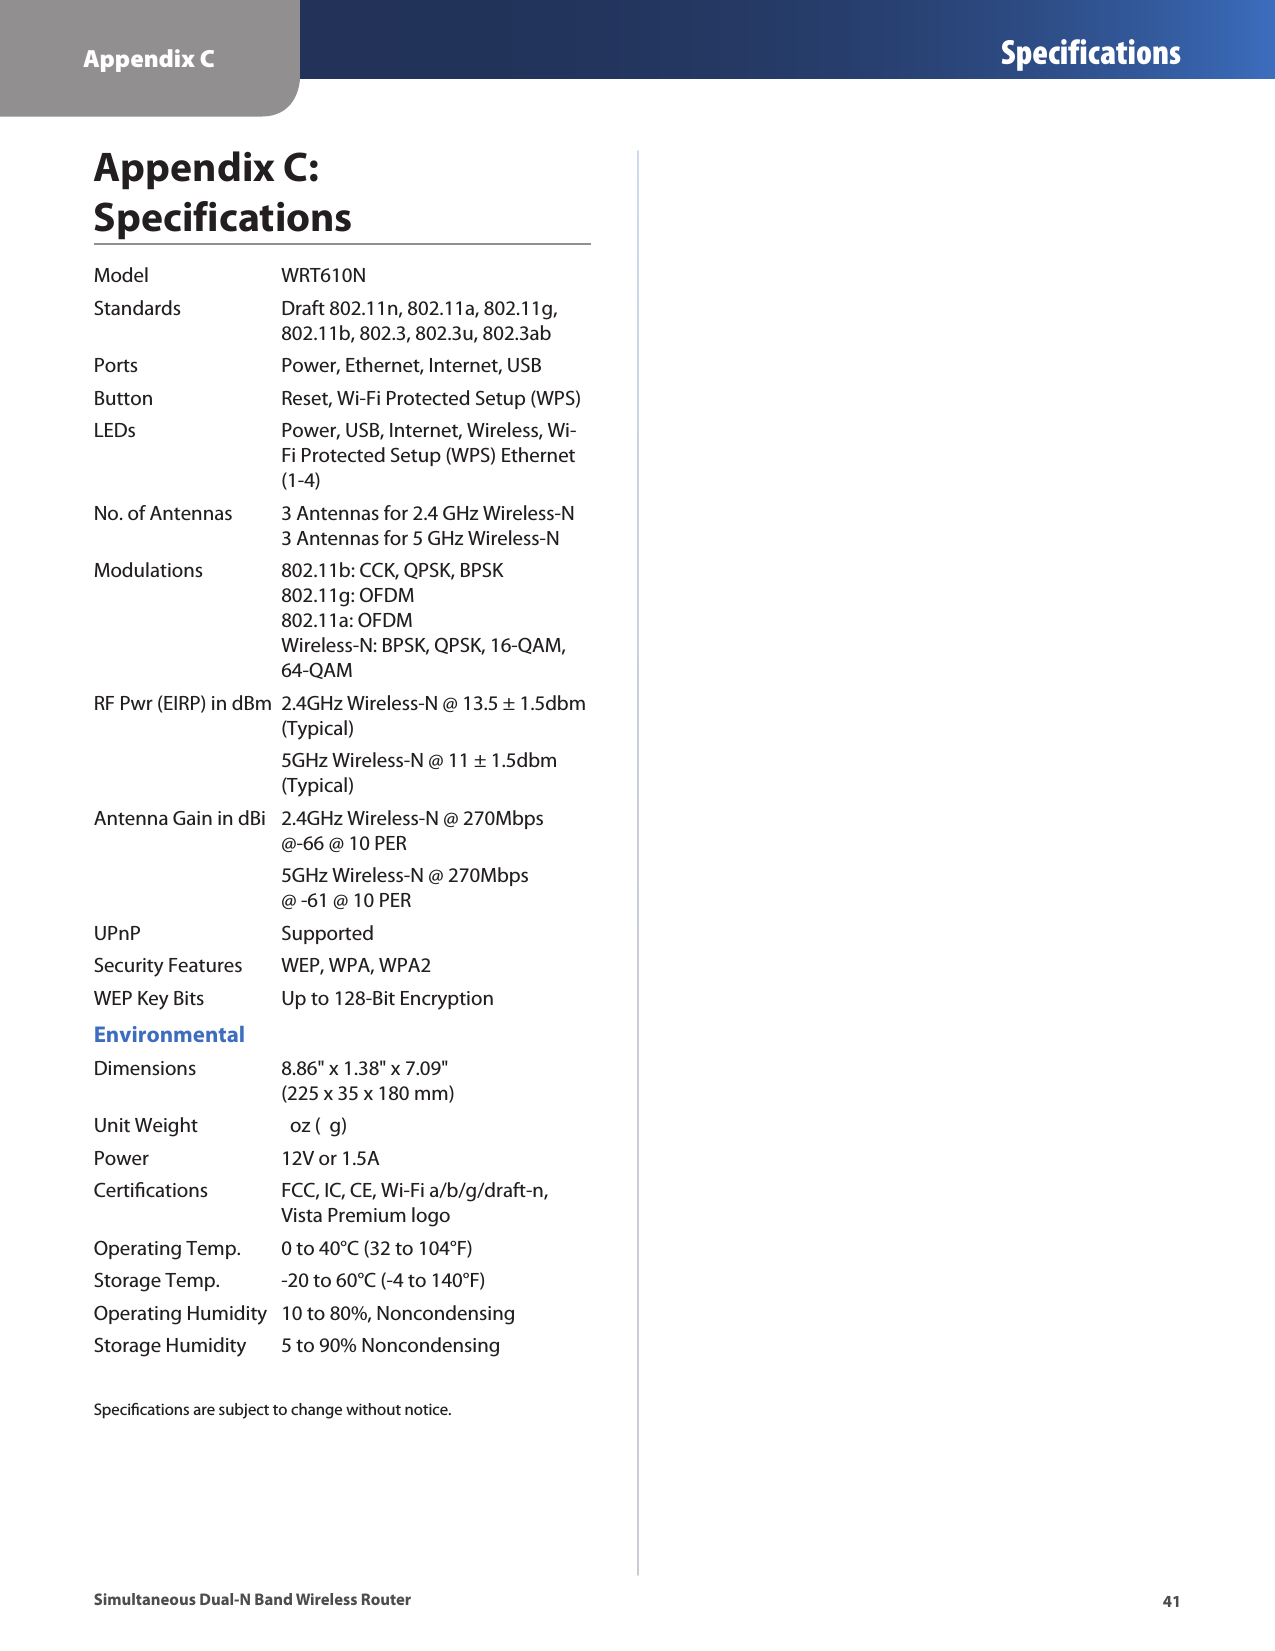 Appendix C Specifications41Simultaneous Dual-N Band Wireless RouterAppendix C:  SpecificationsModel  WRT610NStandards  Draft 802.11n, 802.11a, 802.11g,   802.11b, 802.3, 802.3u, 802.3abPorts  Power, Ethernet, Internet, USBButton  Reset, Wi-Fi Protected Setup (WPS)LEDs  Power, USB, Internet, Wireless, Wi-   Fi Protected Setup (WPS) Ethernet    (1-4)No. of Antennas  3 Antennas for 2.4 GHz Wireless-N   3 Antennas for 5 GHz Wireless-NModulations  802.11b: CCK, QPSK, BPSK    802.11g: OFDM   802.11a: OFDM   Wireless-N: BPSK, QPSK, 16-QAM,   64-QAMRF Pwr (EIRP) in dBm  2.4GHz Wireless-N @ 13.5 ± 1.5dbm    (Typical)  5GHz Wireless-N @ 11 ± 1.5dbm    (Typical) Antenna Gain in dBi  2.4GHz Wireless-N @ 270Mbps    @-66 @ 10 PER  5GHz Wireless-N @ 270Mbps      @ -61 @ 10 PERUPnP   SupportedSecurity Features  WEP, WPA, WPA2WEP Key Bits  Up to 128-Bit EncryptionEnvironmentalDimensions  8.86&quot; x 1.38&quot; x 7.09&quot;   (225 x 35 x 180 mm)Unit Weight    oz (  g)Power  12V or 1.5ACertications  FCC, IC, CE, Wi-Fi a/b/g/draft-n,    Vista Premium logoOperating Temp.  0 to 40°C (32 to 104°F)Storage Temp.  -20 to 60°C (-4 to 140°F)Operating Humidity  10 to 80%, NoncondensingStorage Humidity  5 to 90% NoncondensingSpecications are subject to change without notice.